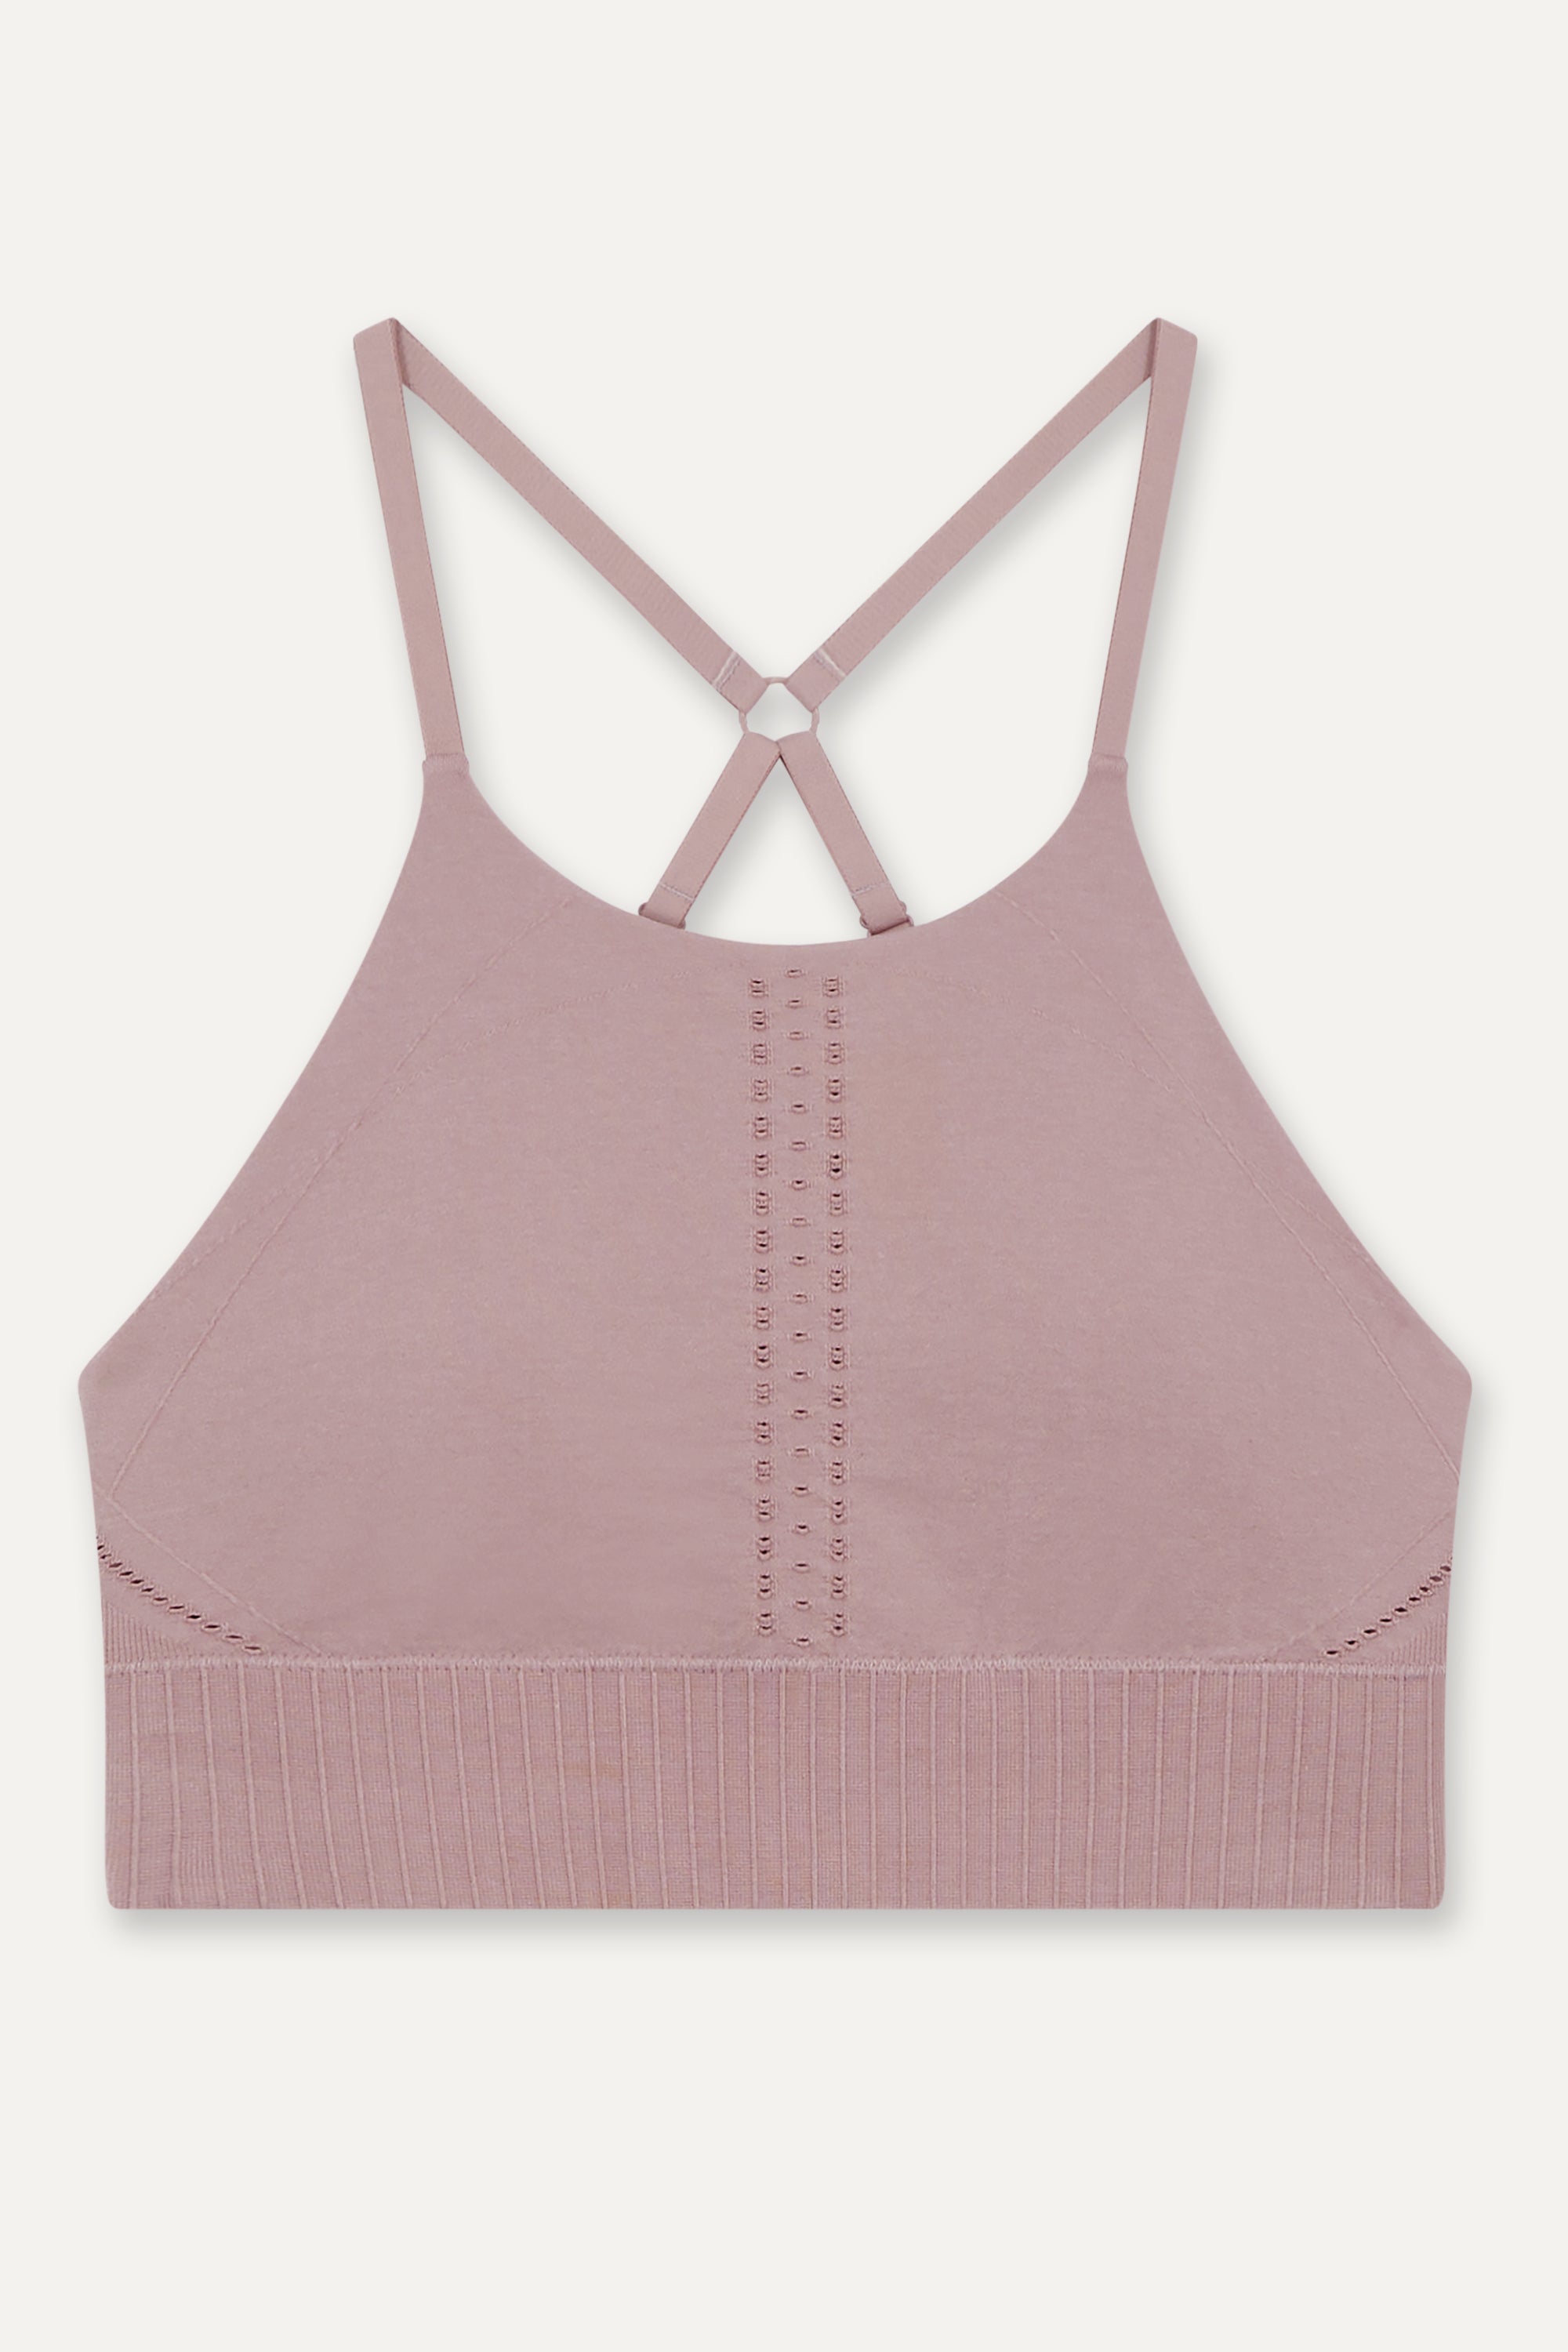 Dusky dusty pink purple long line high neck sports bra top with adjustable straps and removable padding from seamless recycled fabric for yoga, pilates, barre, gym and exercise by sustainable activewear brand Jilla Active 